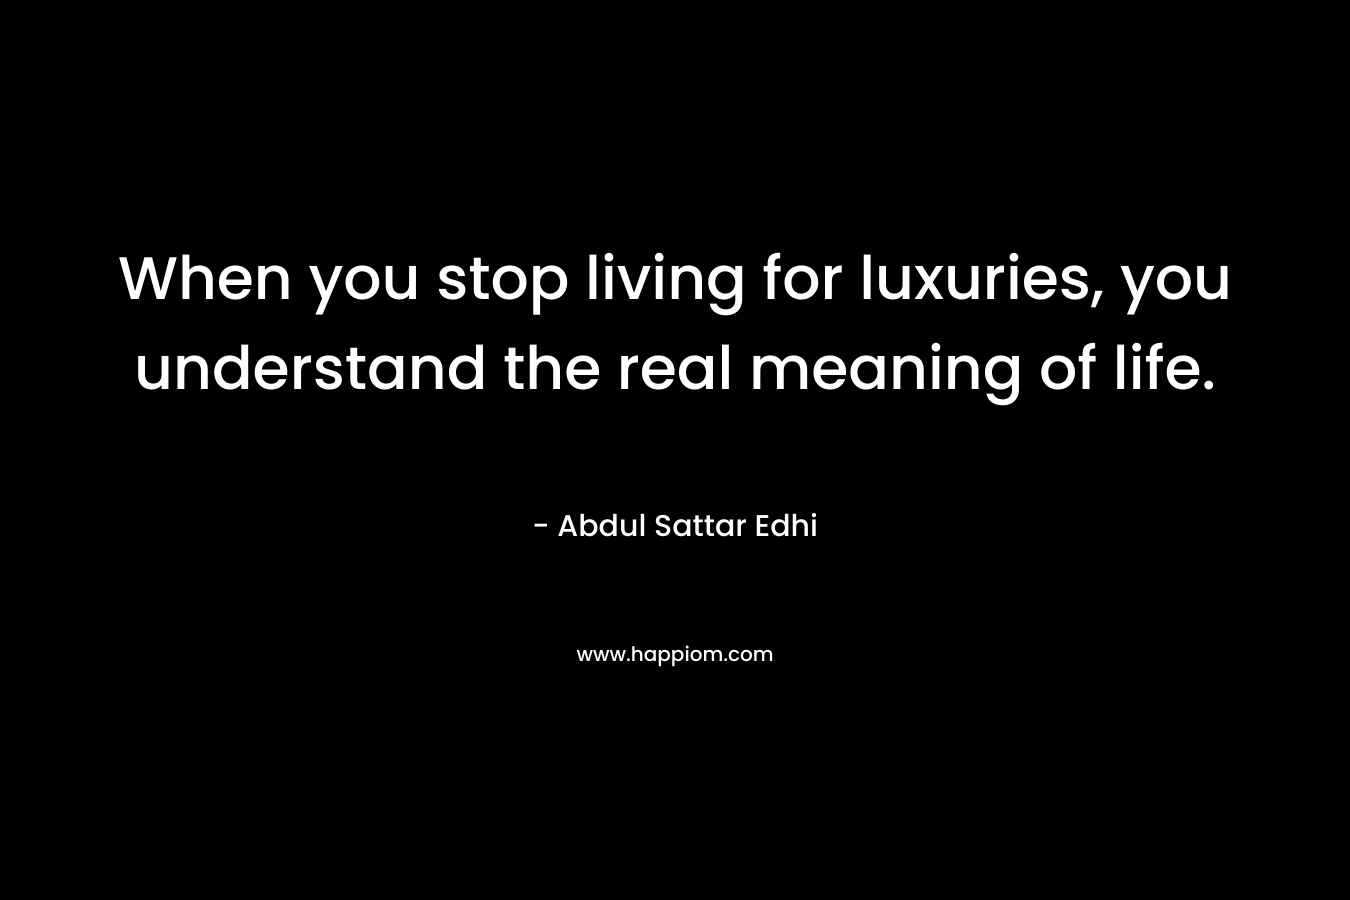 When you stop living for luxuries, you understand the real meaning of life. – Abdul Sattar Edhi